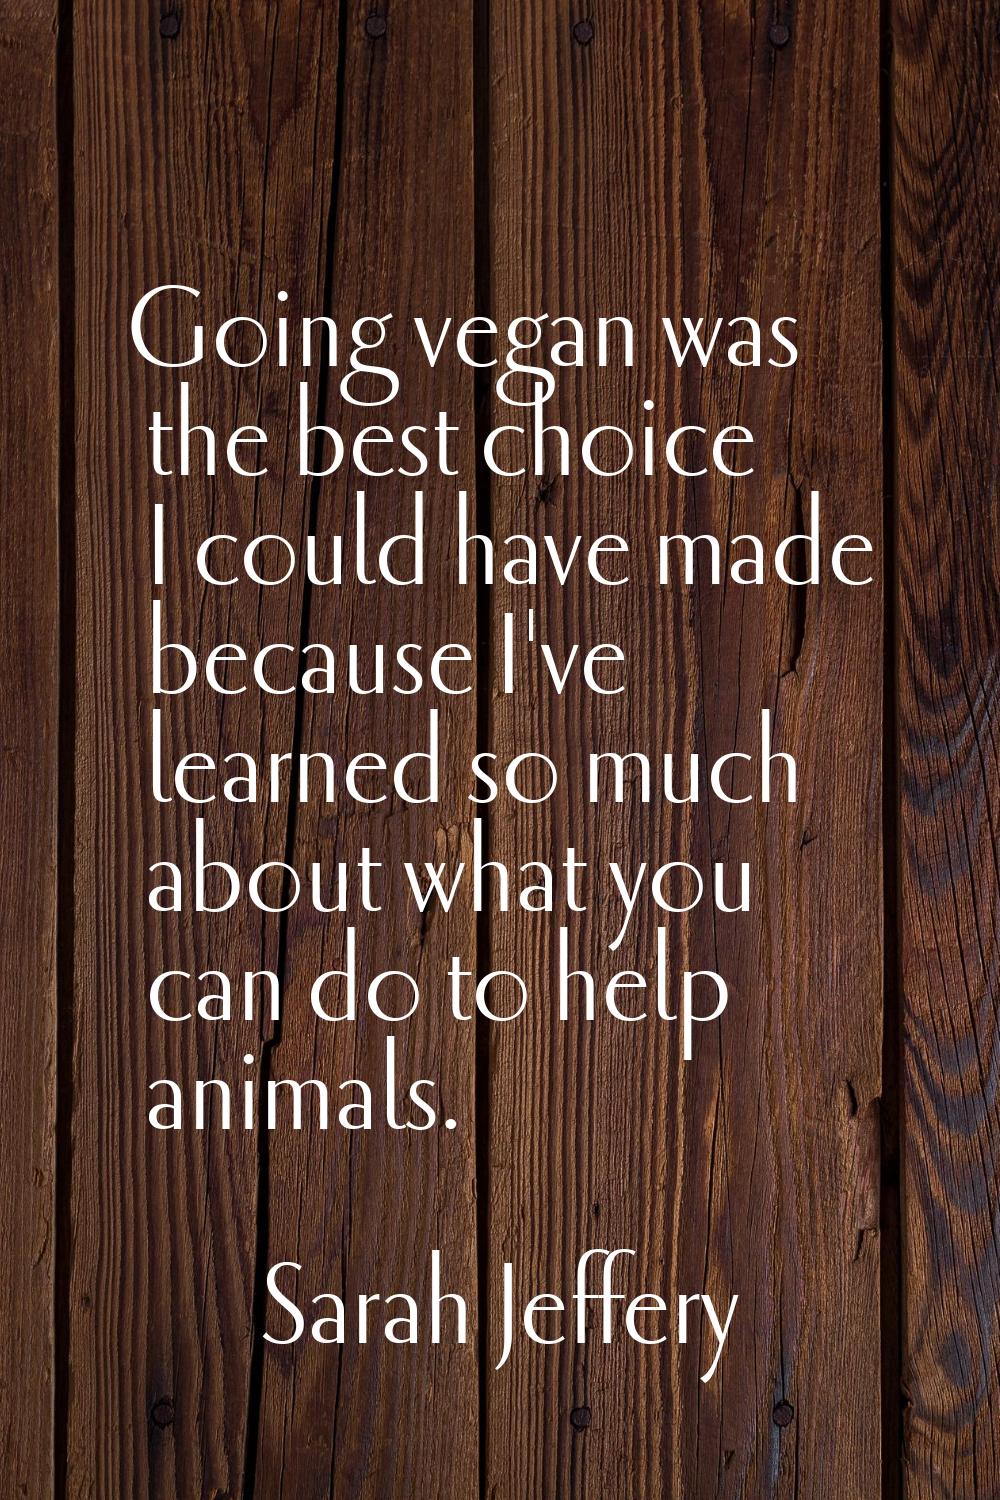 Going vegan was the best choice I could have made because I've learned so much about what you can d